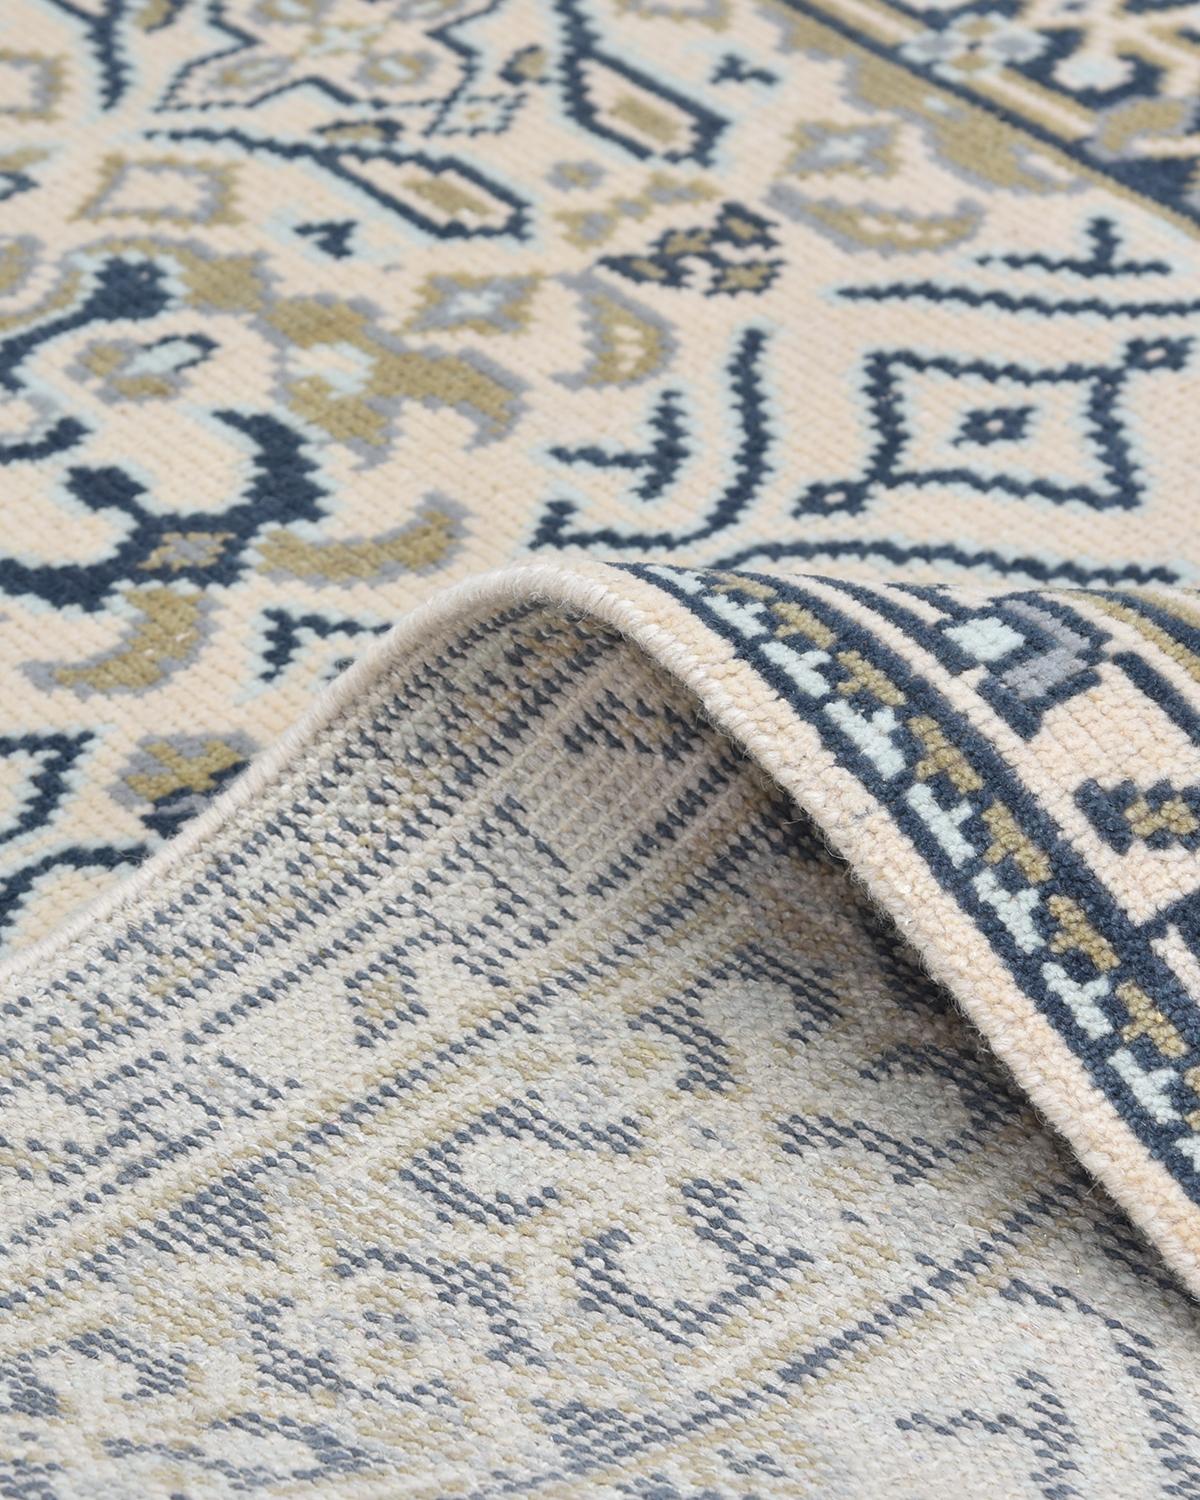 traditional patterned carpets